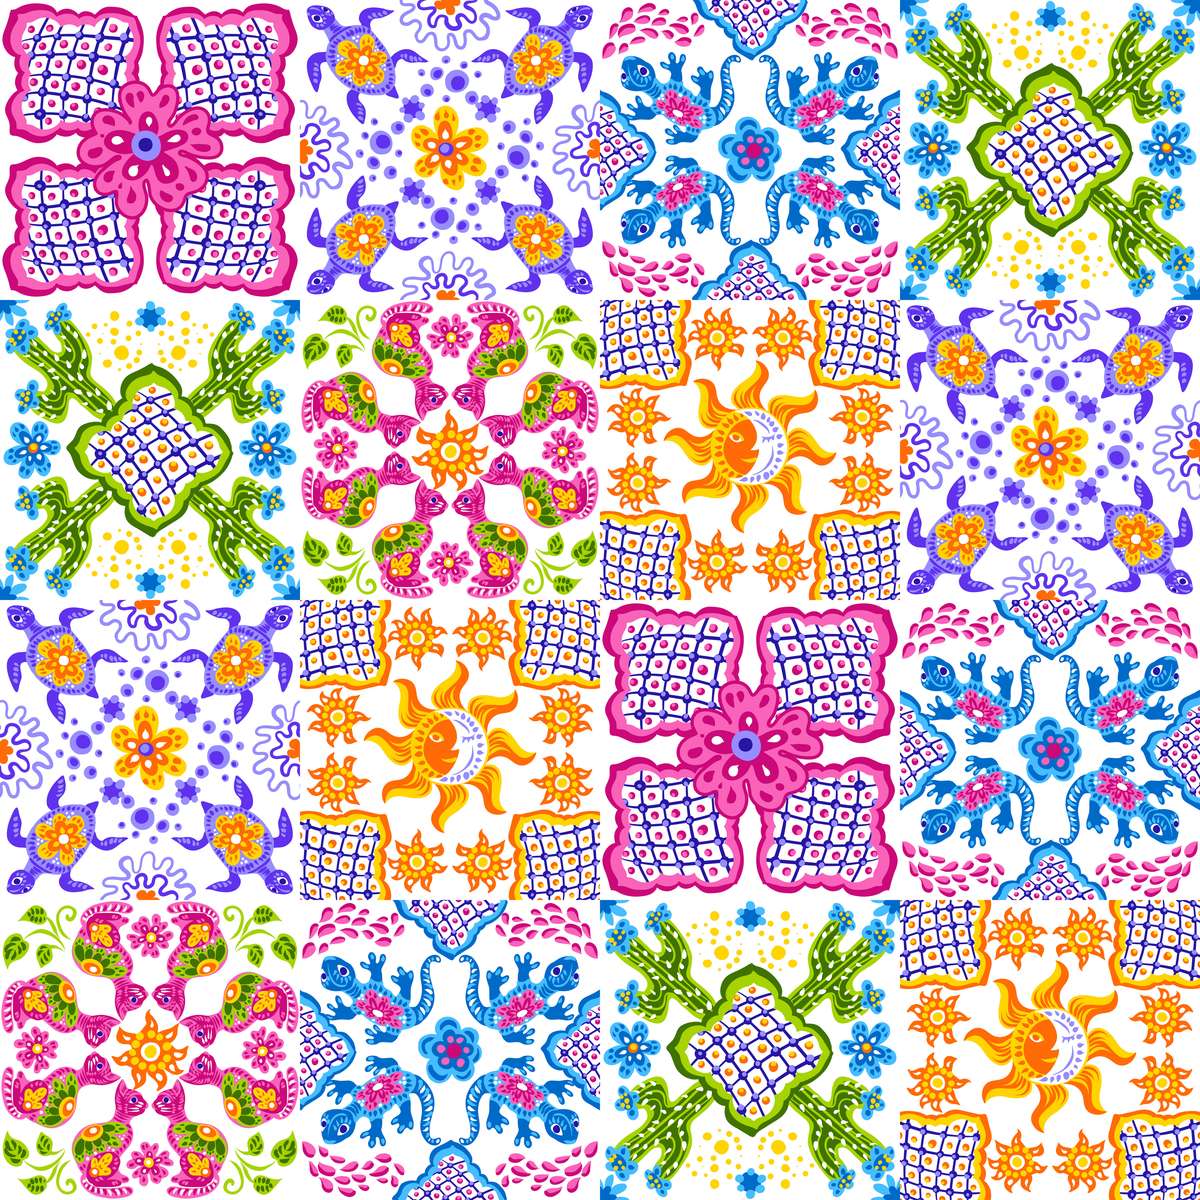 Colourful tiles puzzle online from photo